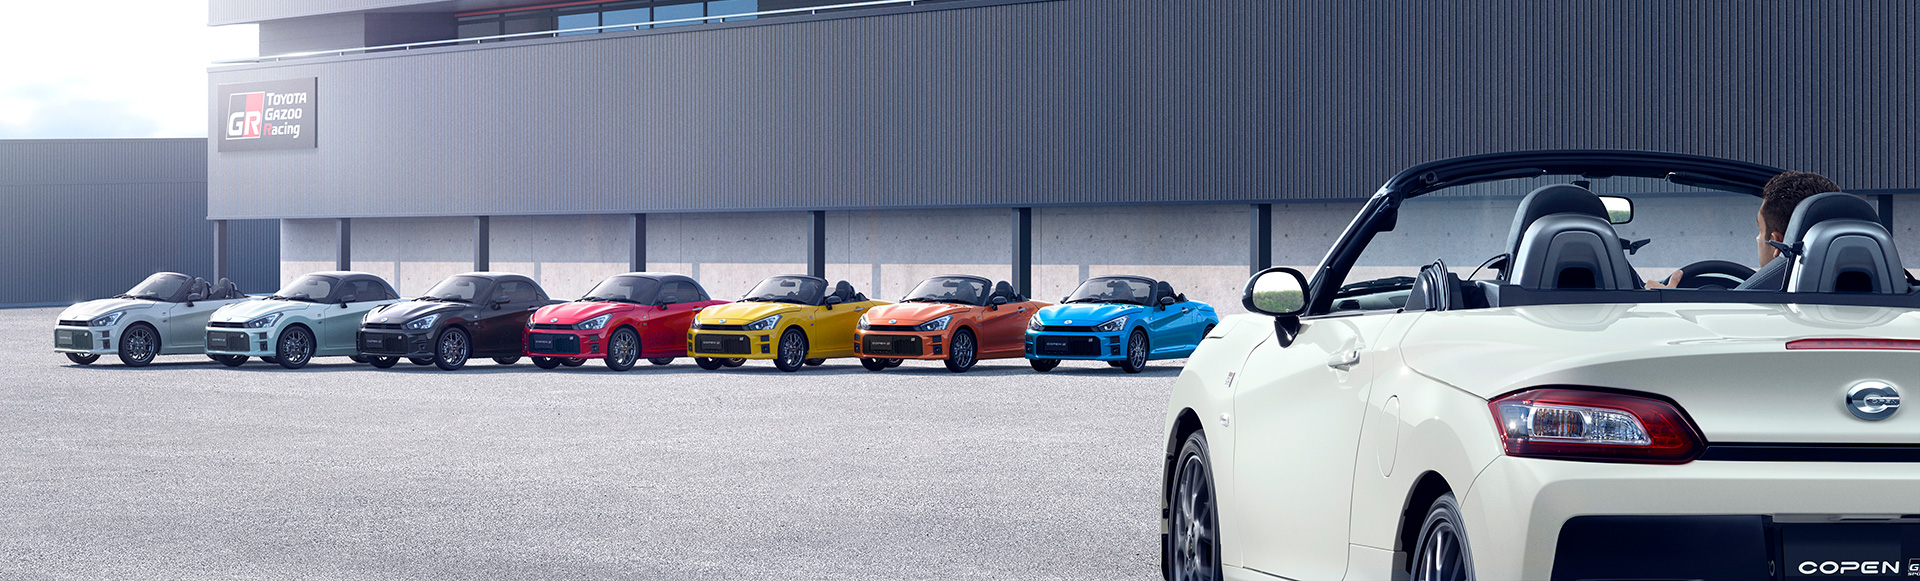 Toyota Rolls Out New Compact Convertible Sports Car Copen GR SPORT in Japan